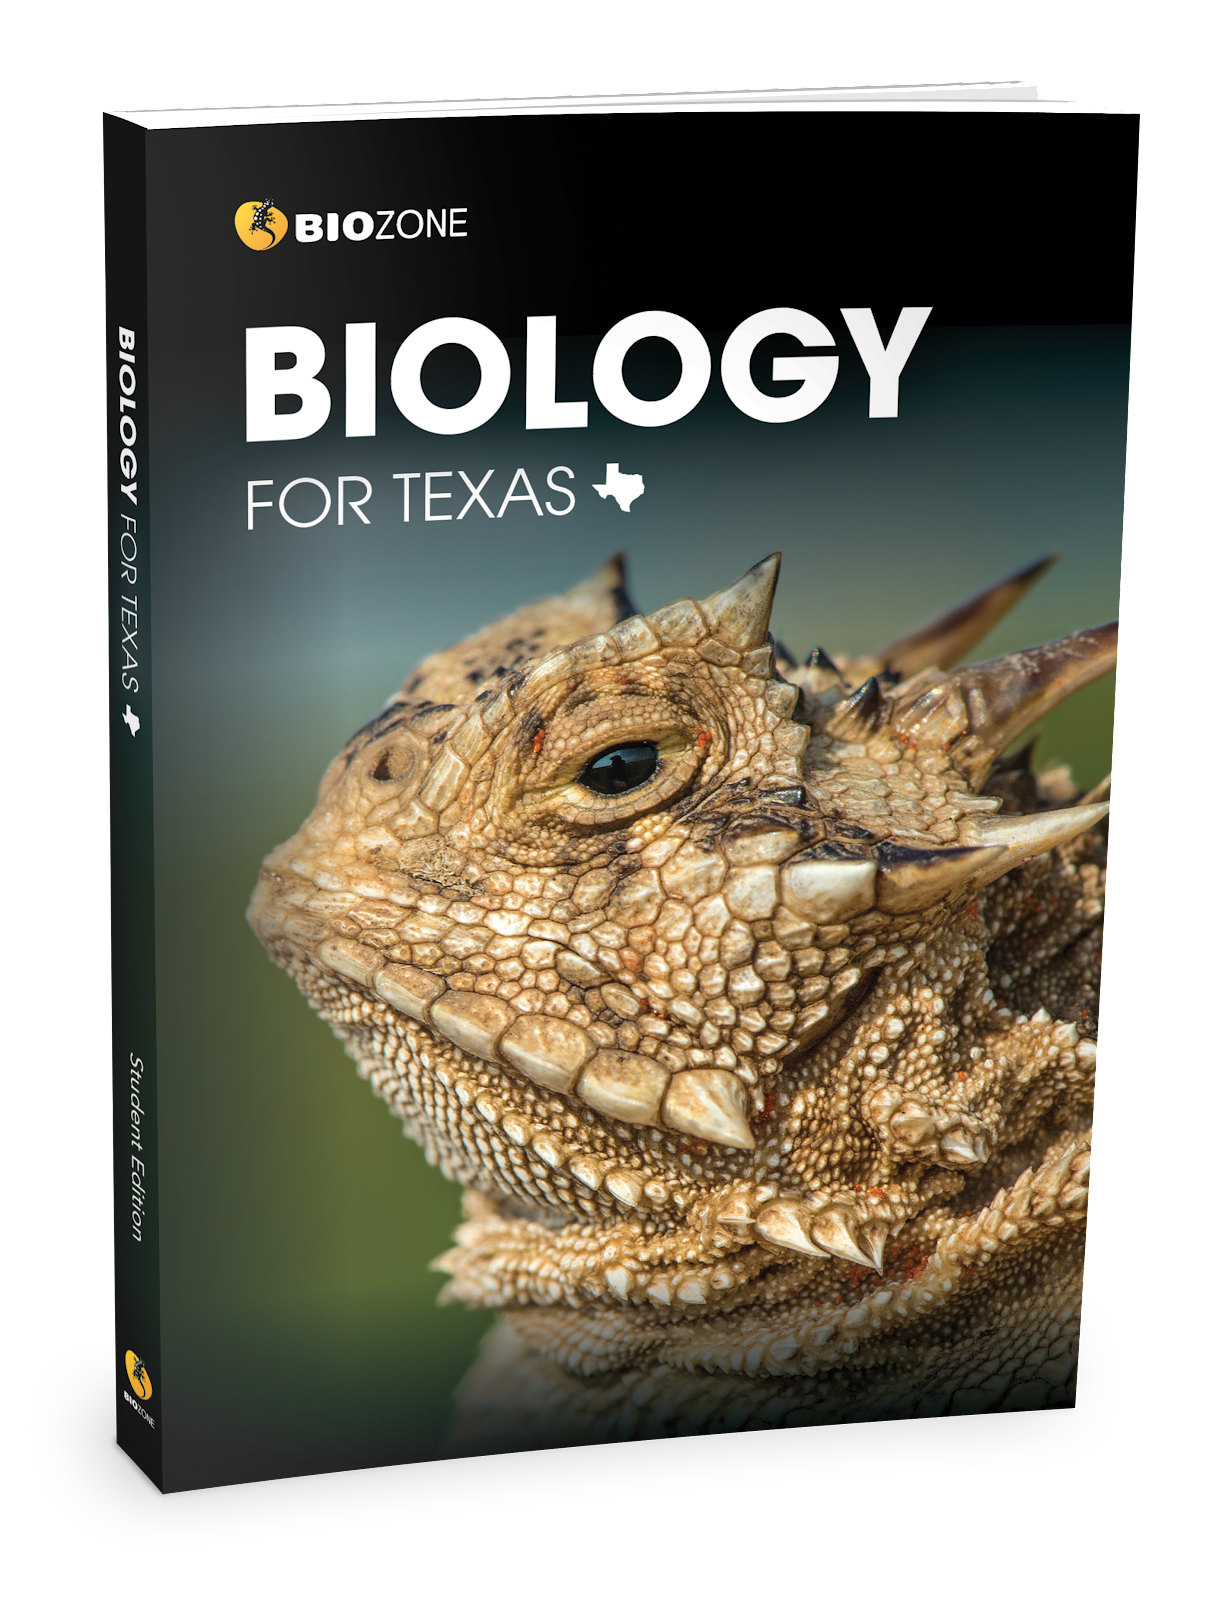 Biology for Texas print title with Horned Lizard on blue background